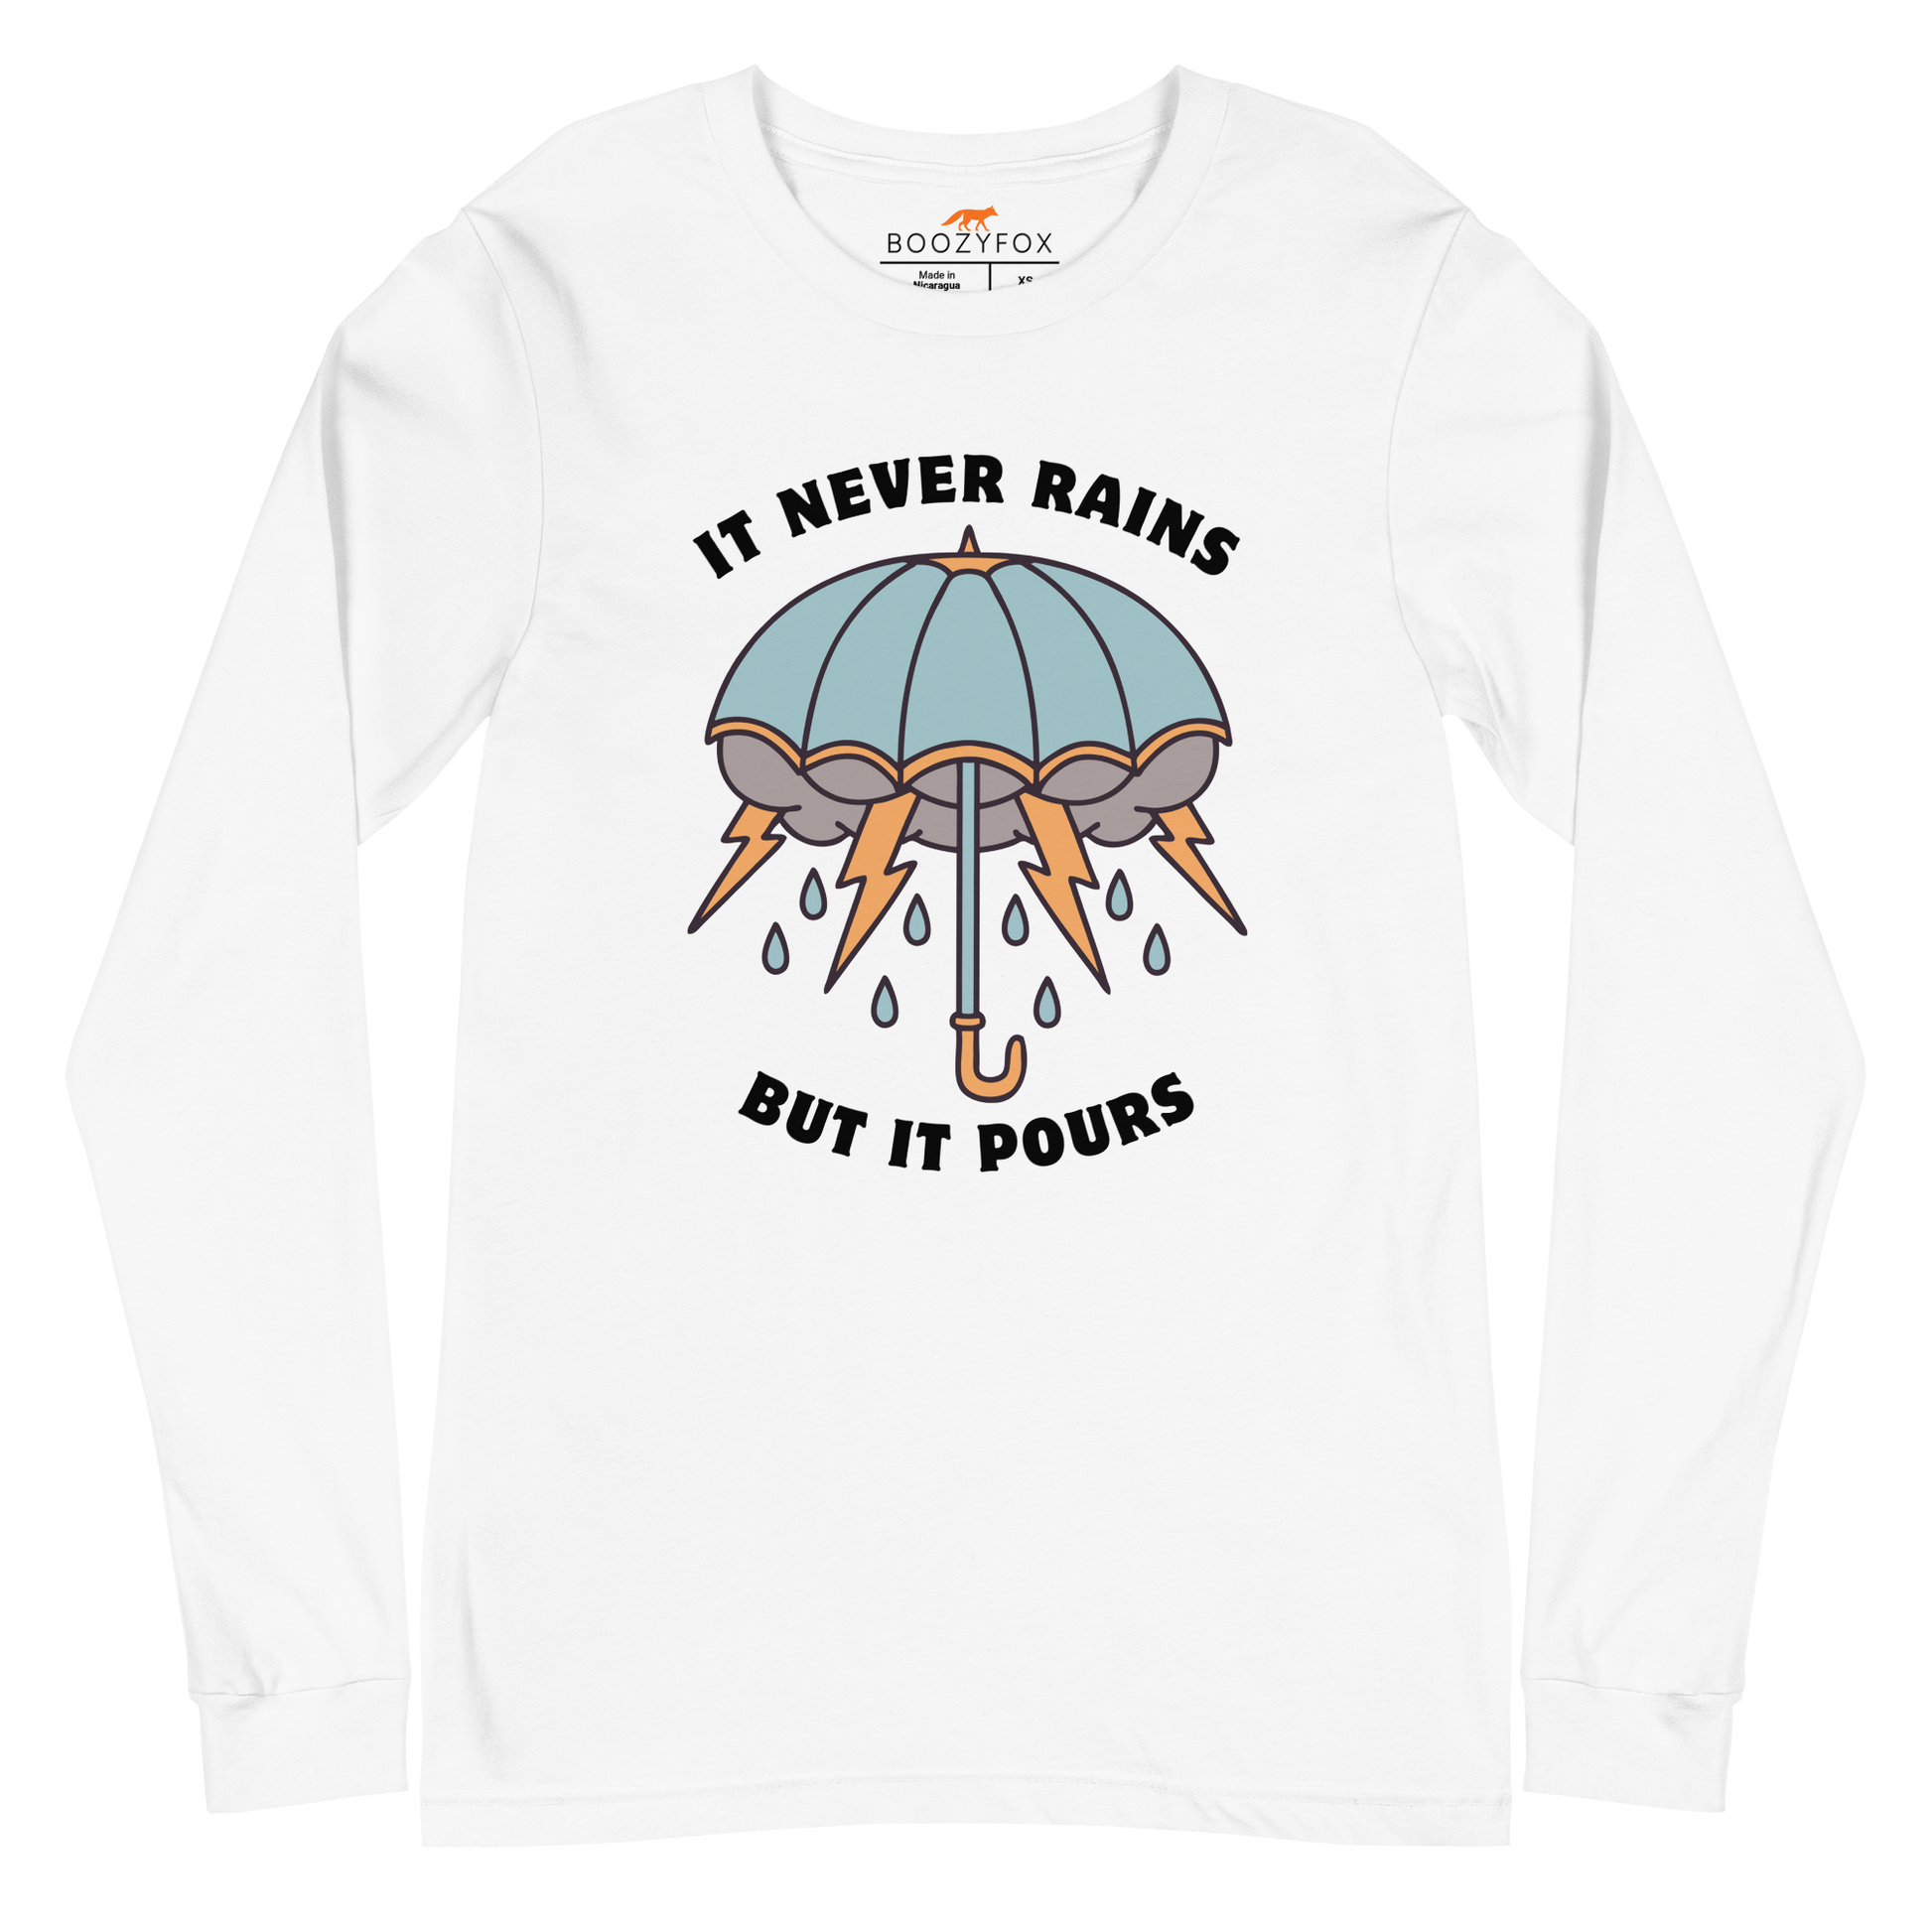 White Umbrella Long Sleeve Tee featuring a unique It Never Rains But It Pours graphic on the chest - Cool Tattoo-Inspired Umbrella Long Sleeve Graphic Tees - Boozy Fox